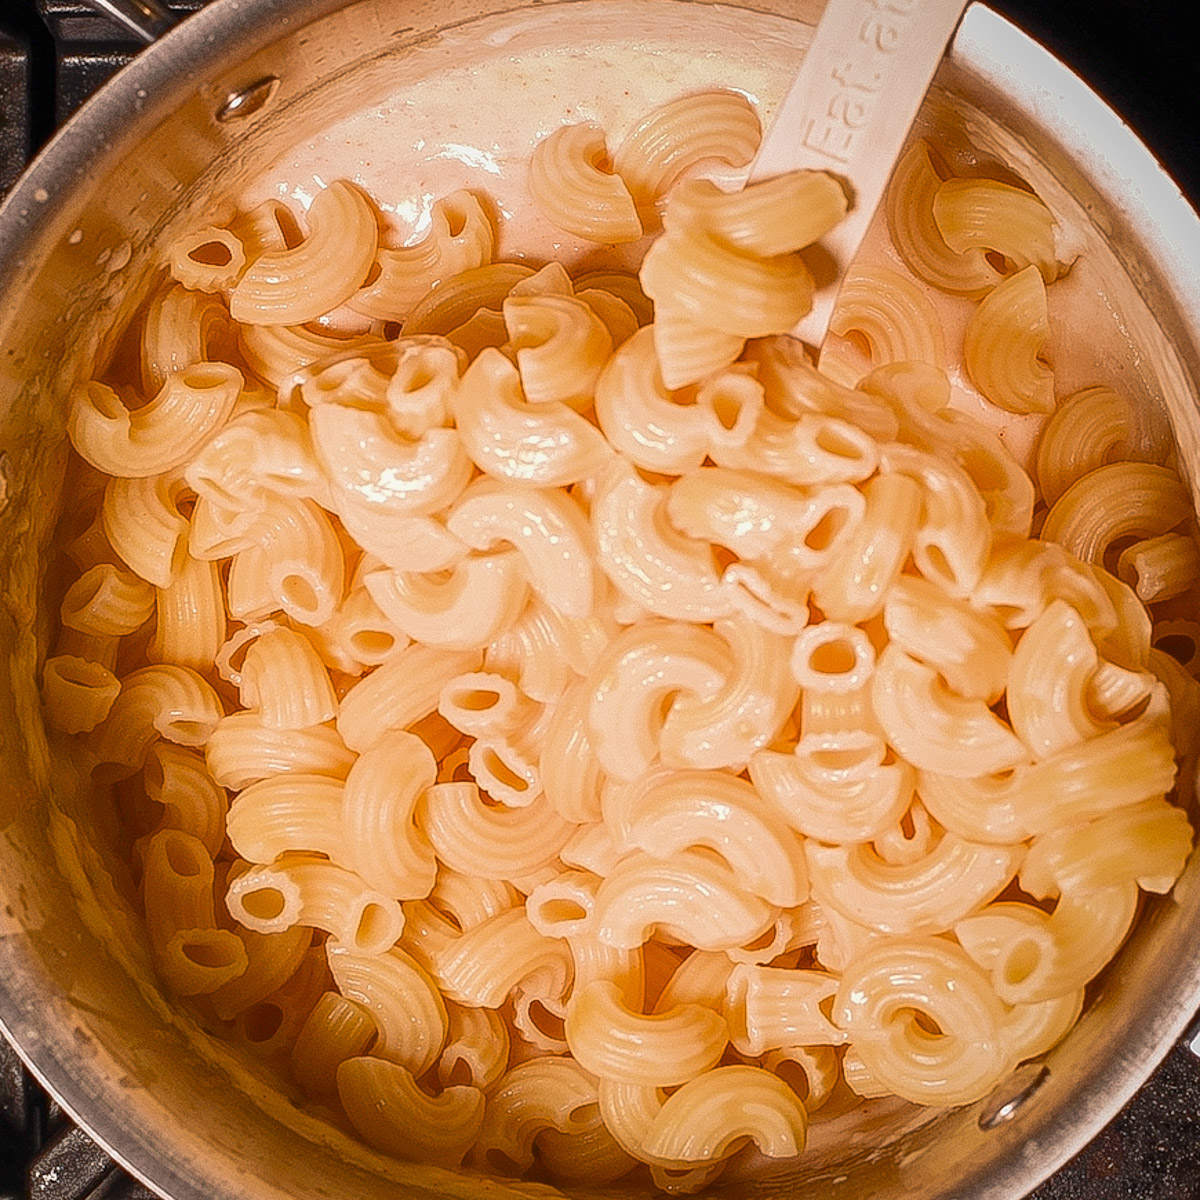 Add the cooked elbow macaroni.